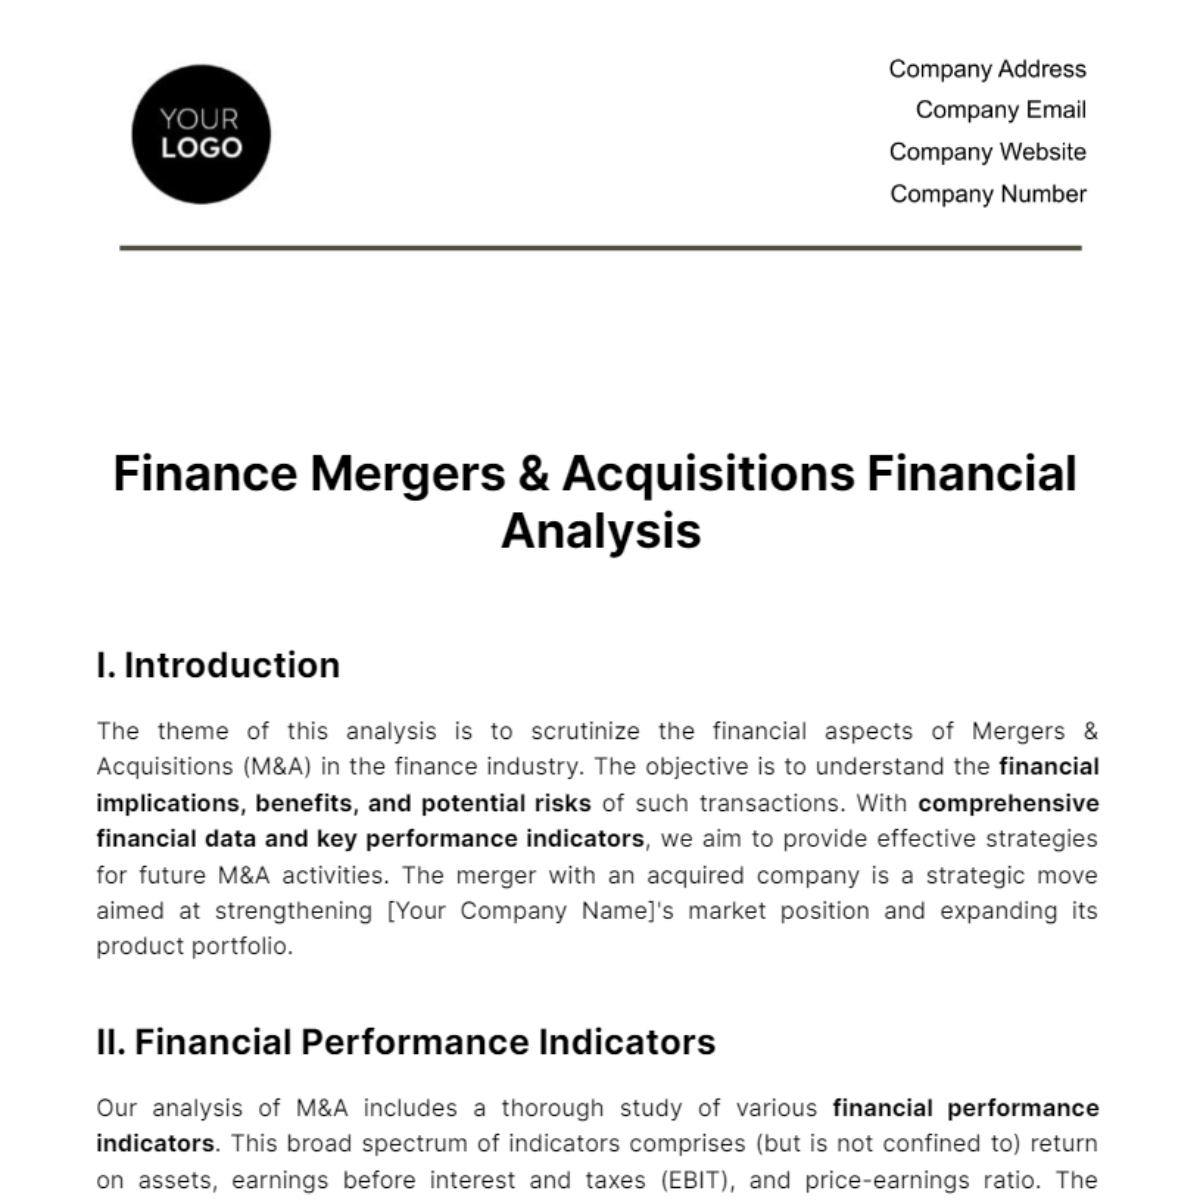 Finance Mergers & Acquisitions Financial Analysis Template